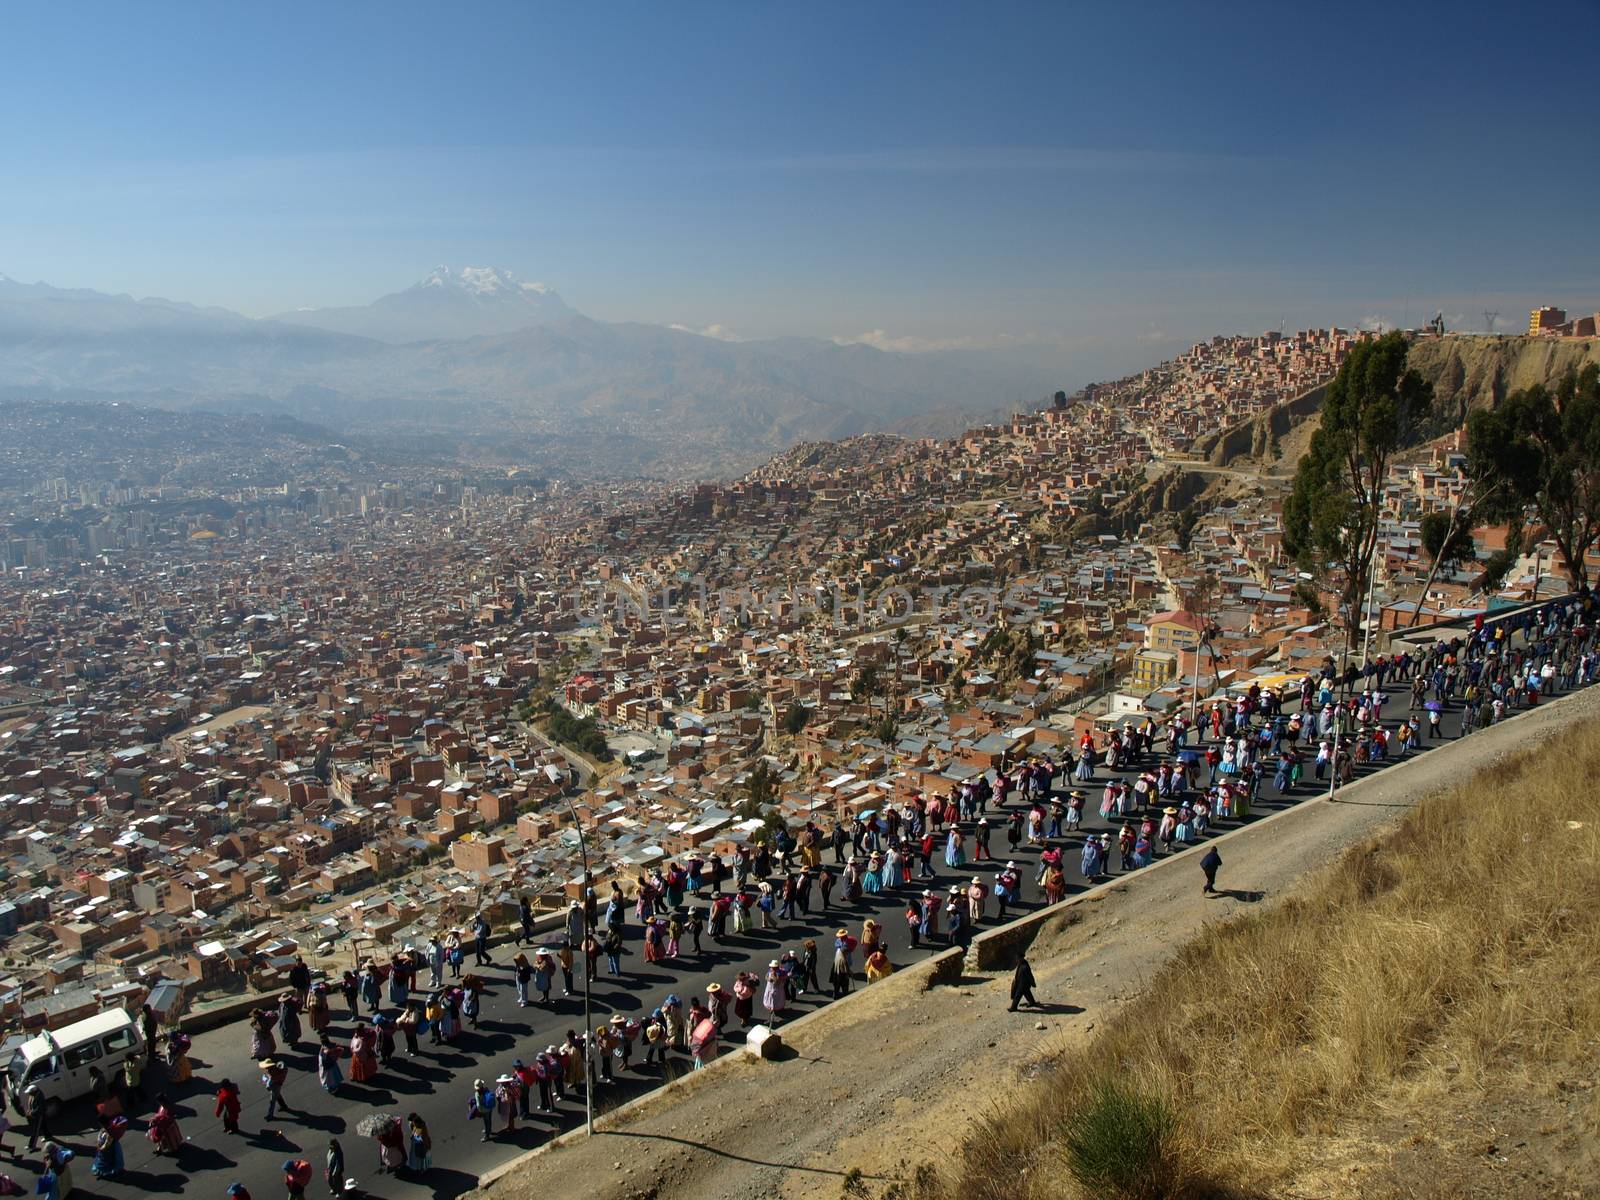 Parade in La Paz by pyty